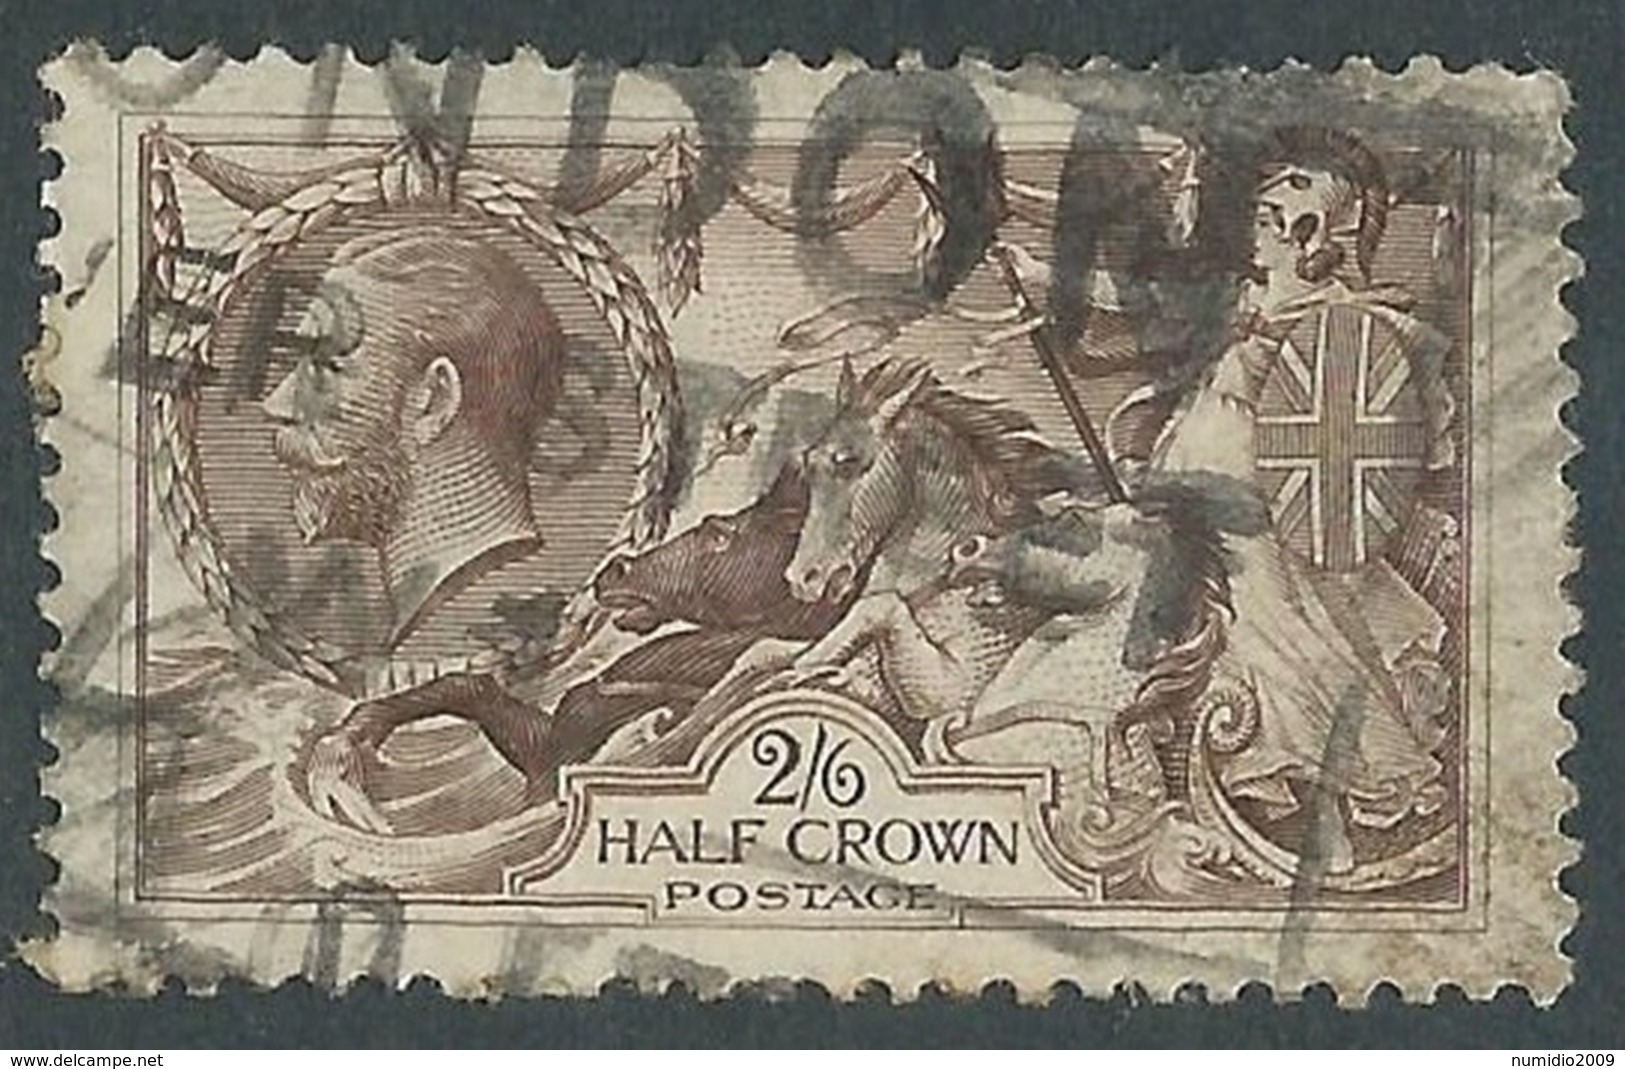 1918-19 GREAT BRITAIN USED SEA HORSES SG 415a 2s6d PALE BROWN - F22-8 - Usati